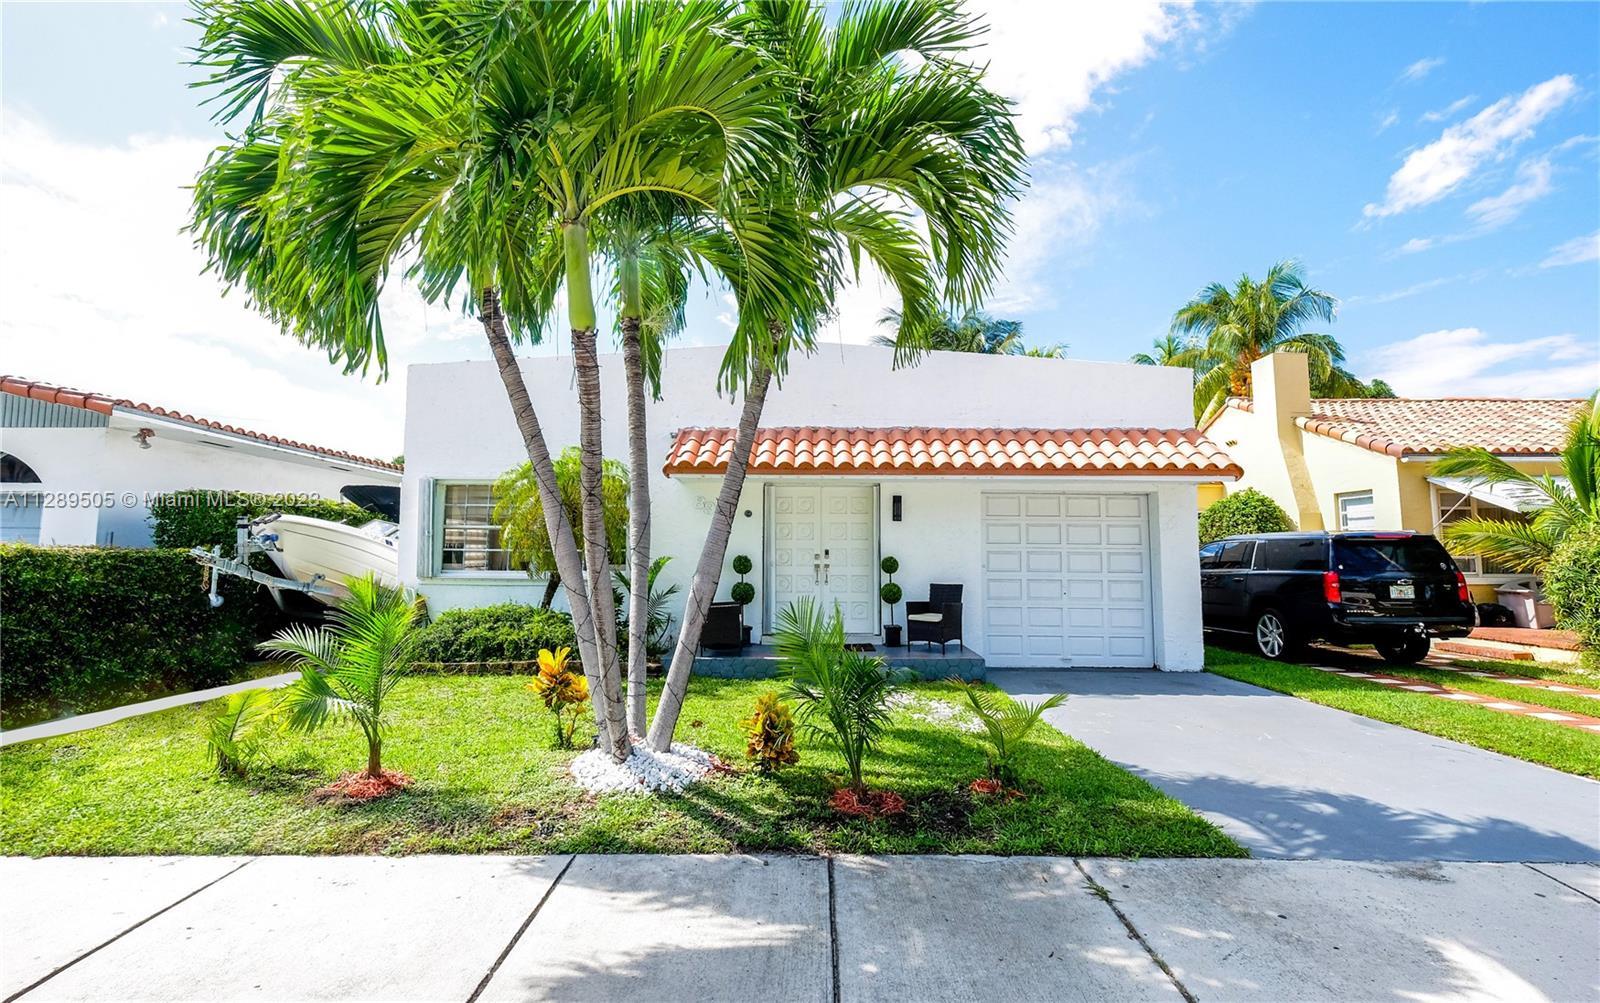 BEST OPPORTUNITY HOME in the desirable Town of Surfside. This beautiful newly renovated home has 3 b